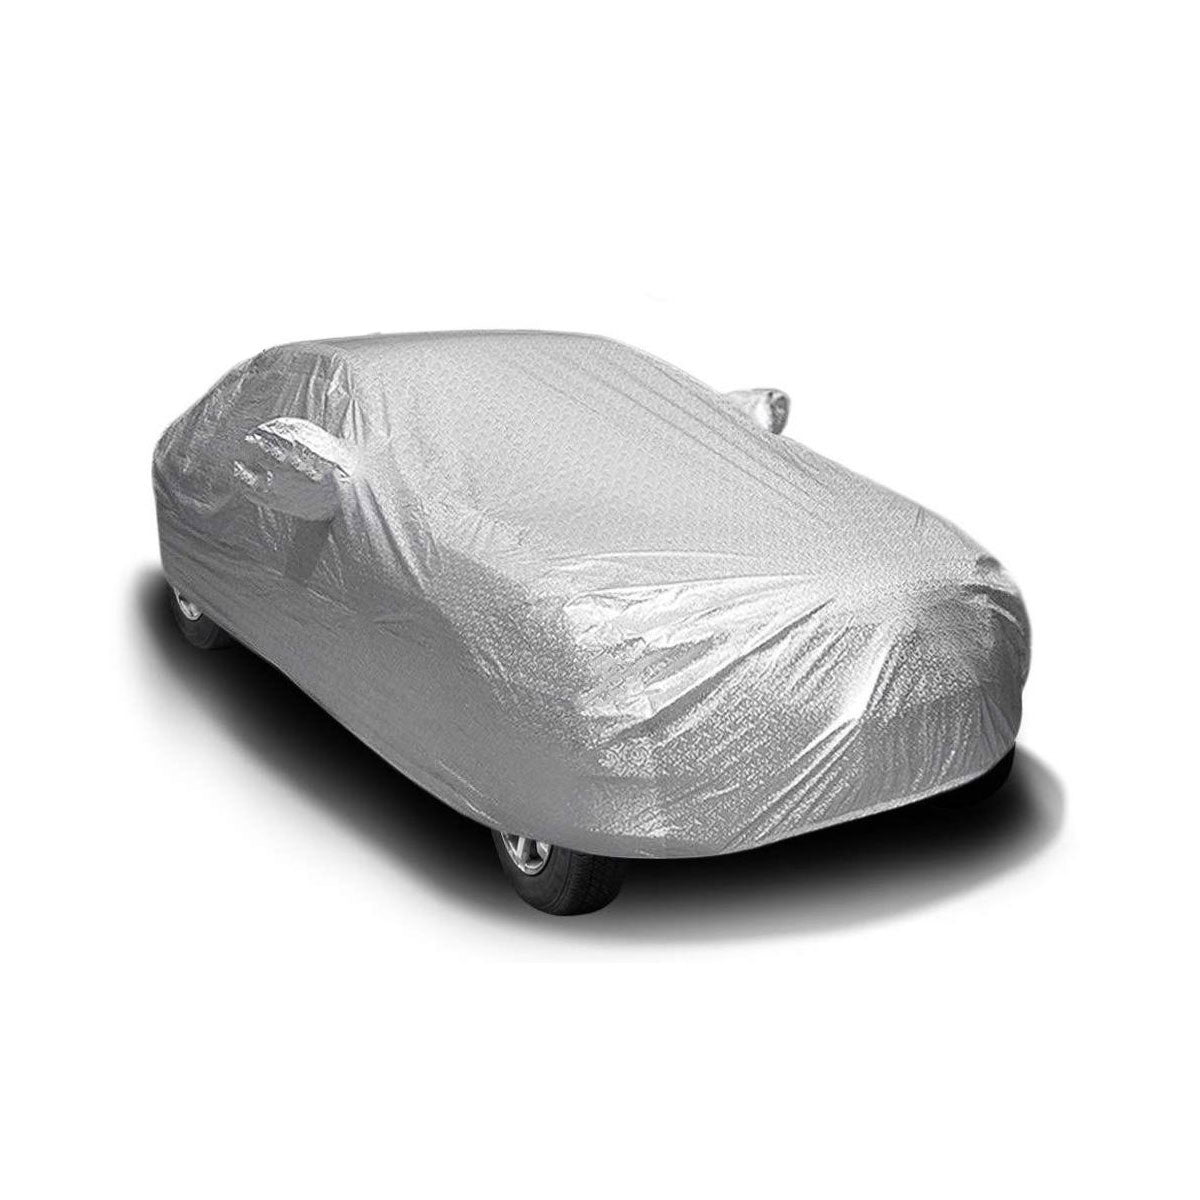 Oshotto Spyro Silver Anti Reflective, dustproof and Water Proof Car Body Cover with Mirror Pockets For Toyota Land Cruiser Prado